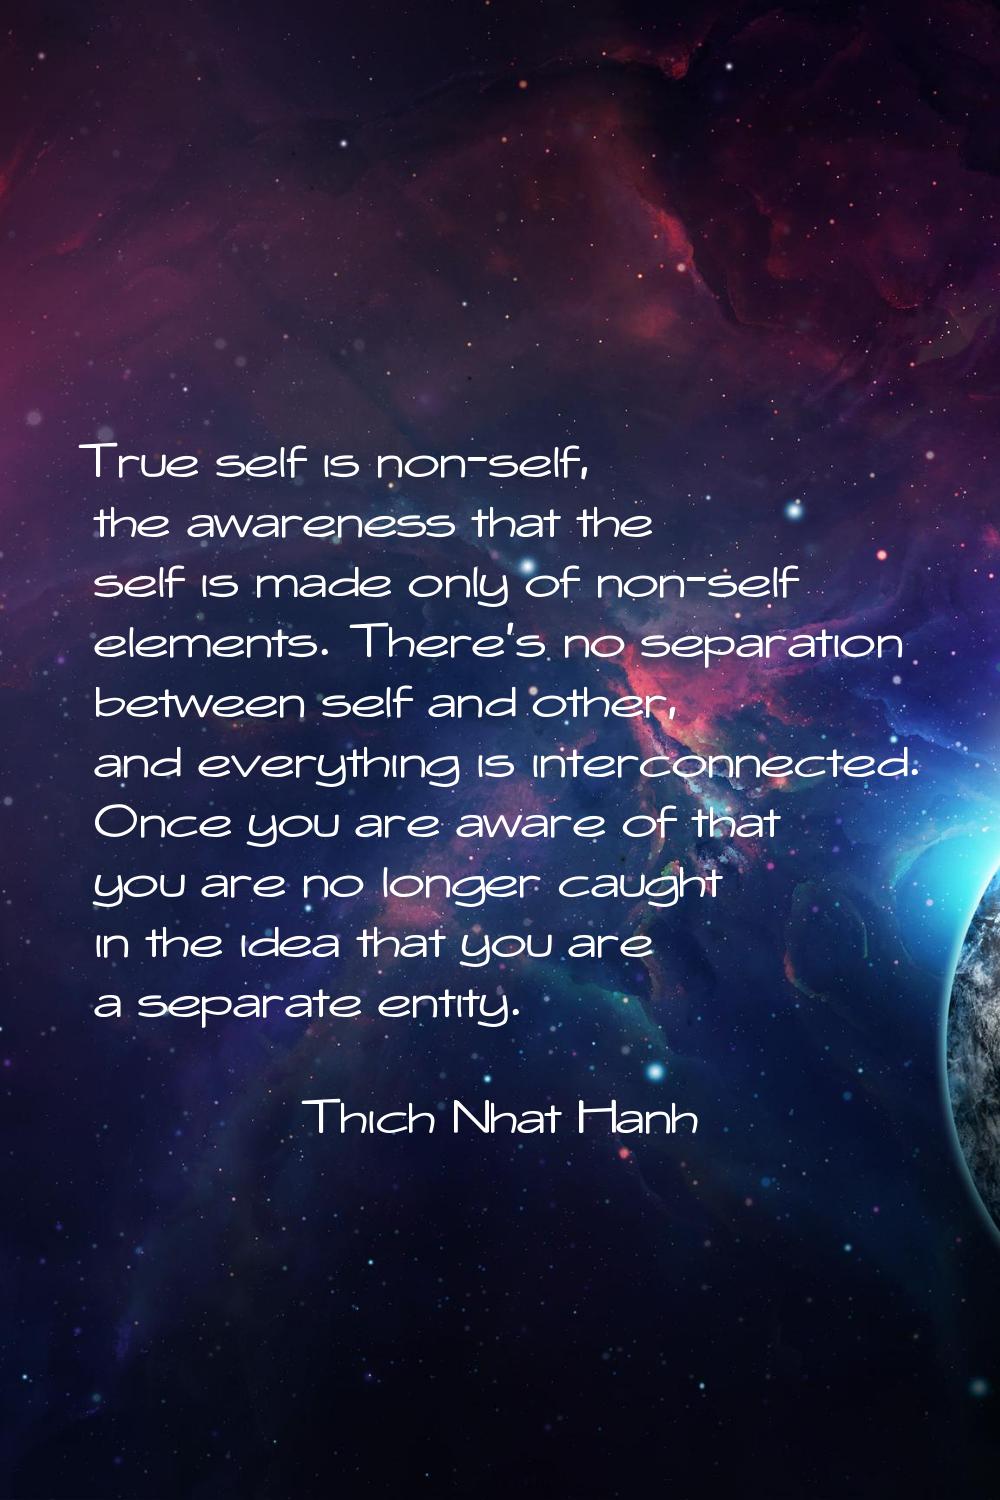 True self is non-self, the awareness that the self is made only of non-self elements. There's no se